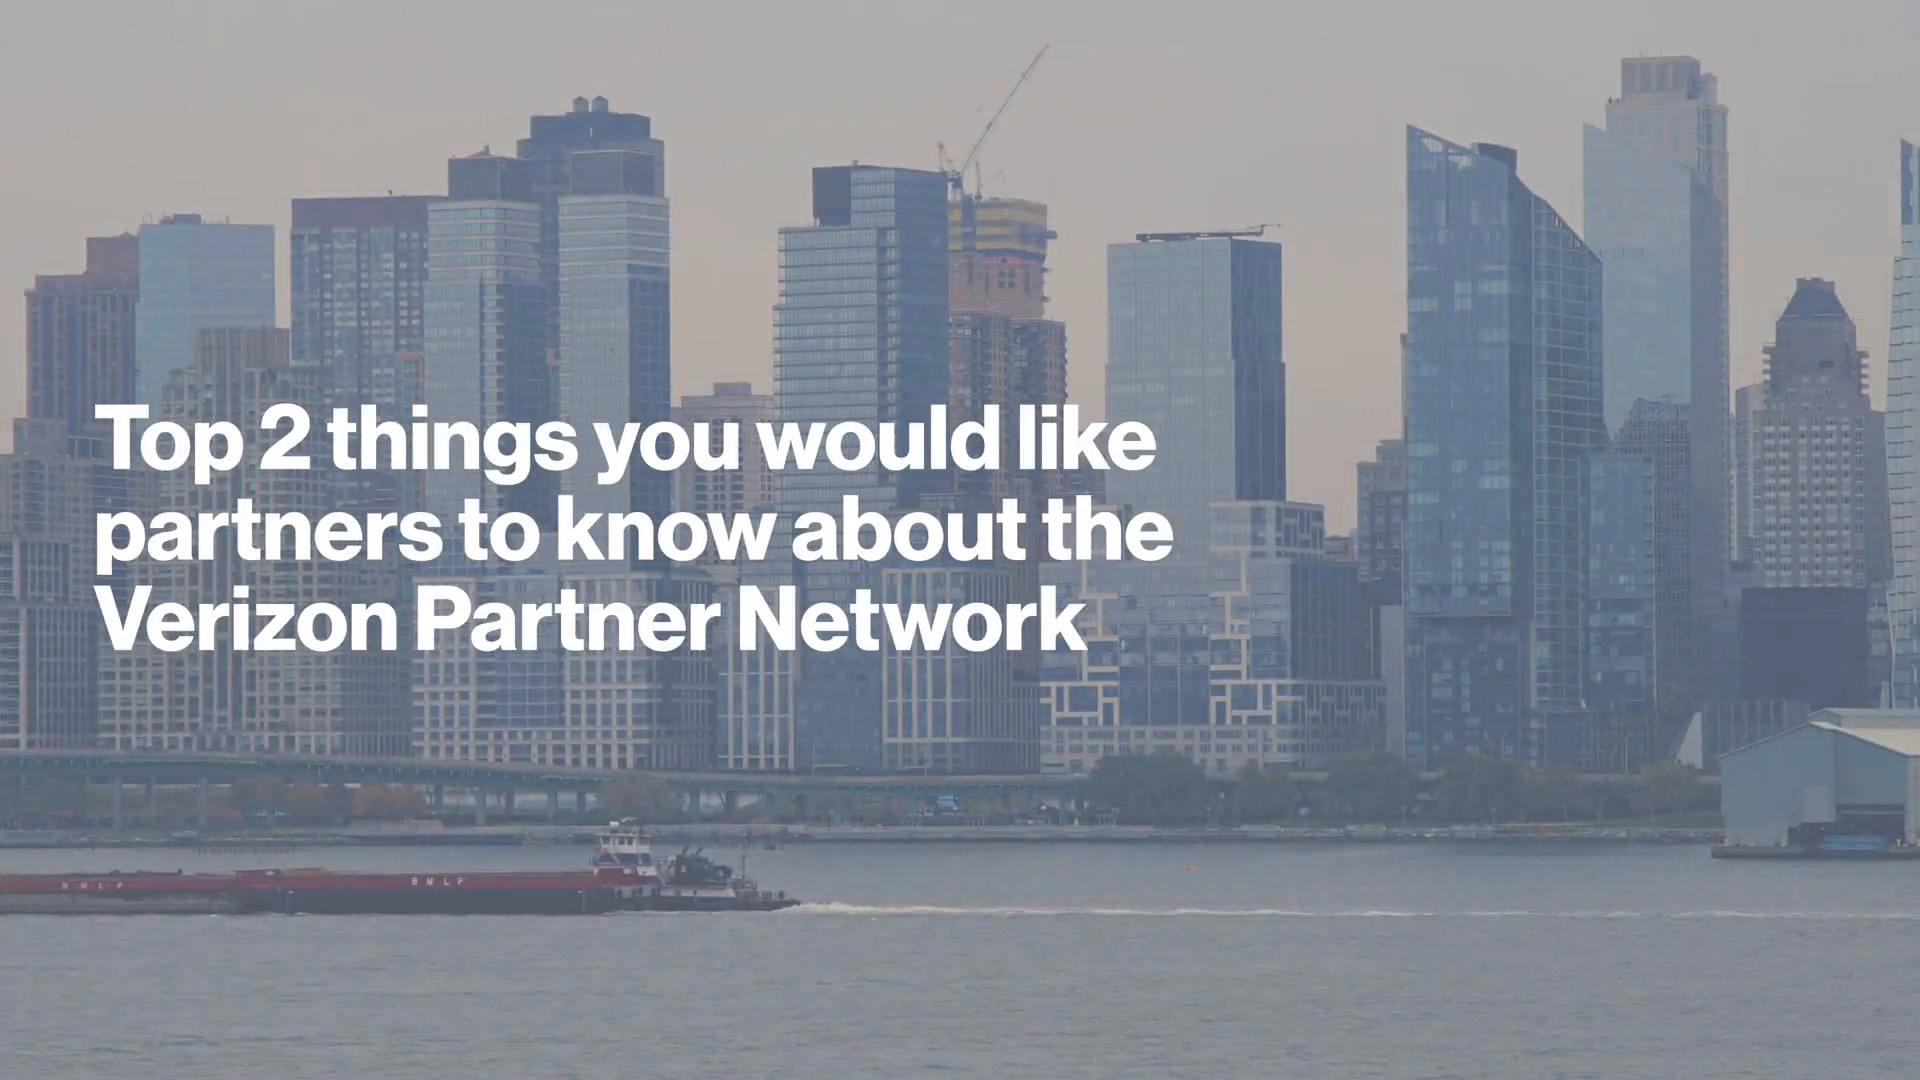 Overcoming Challenges Through Immediate Solutions: The Top 2 things Jeff DeBeech would like partners to know about the Verizon Partner Network